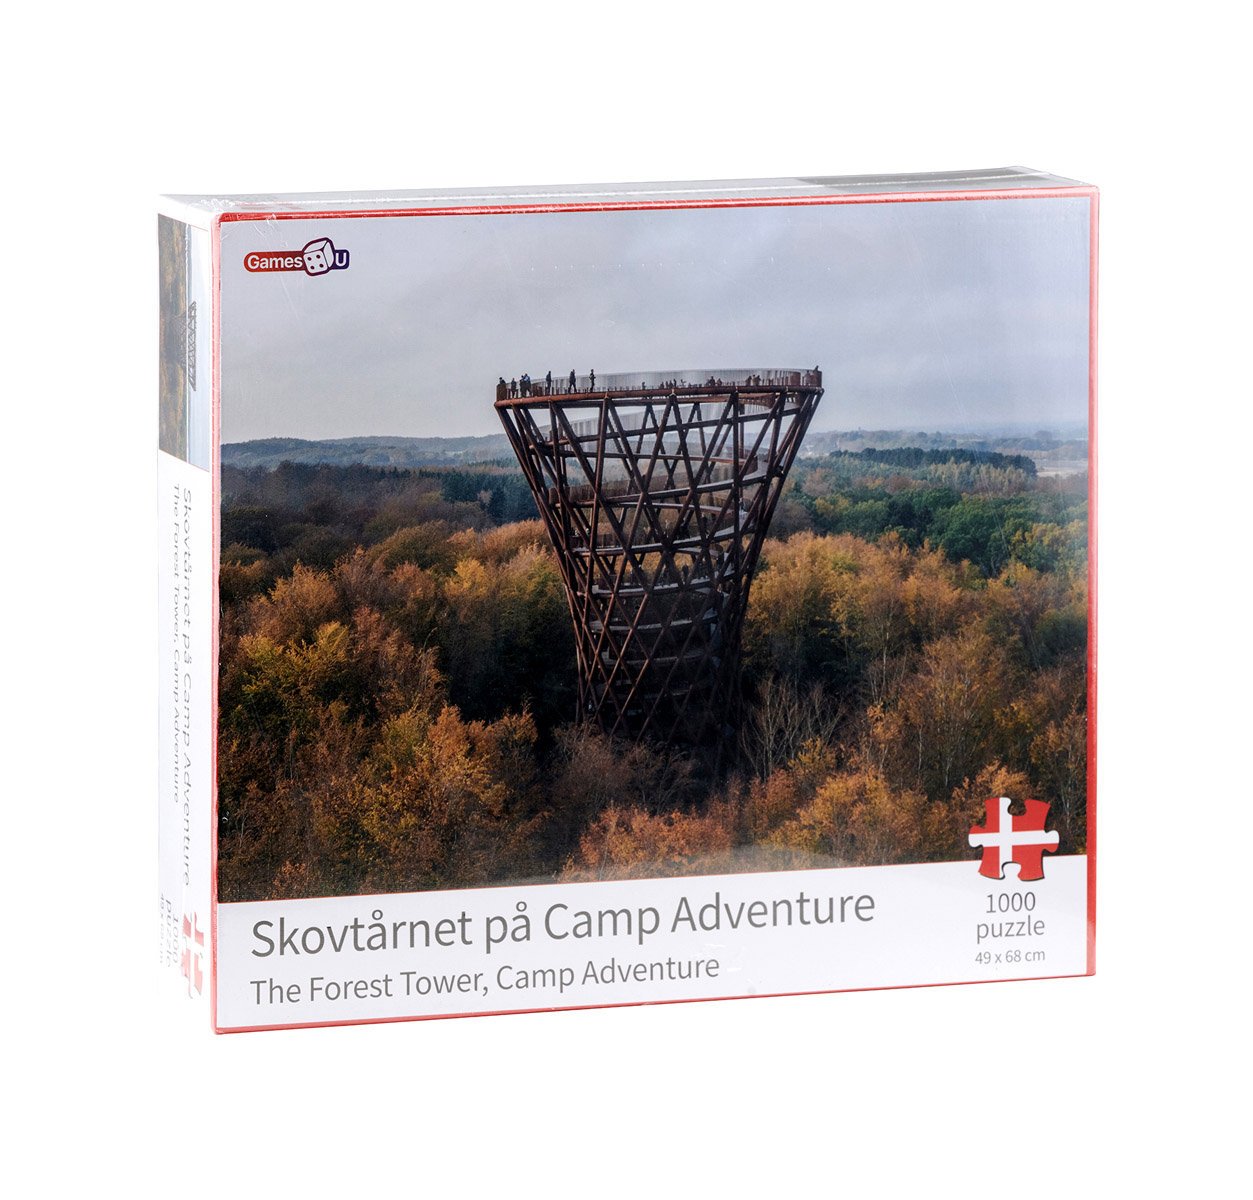 Denmark Puzzle - The Forest Tower, Camp Adventure (1000 pcs.)